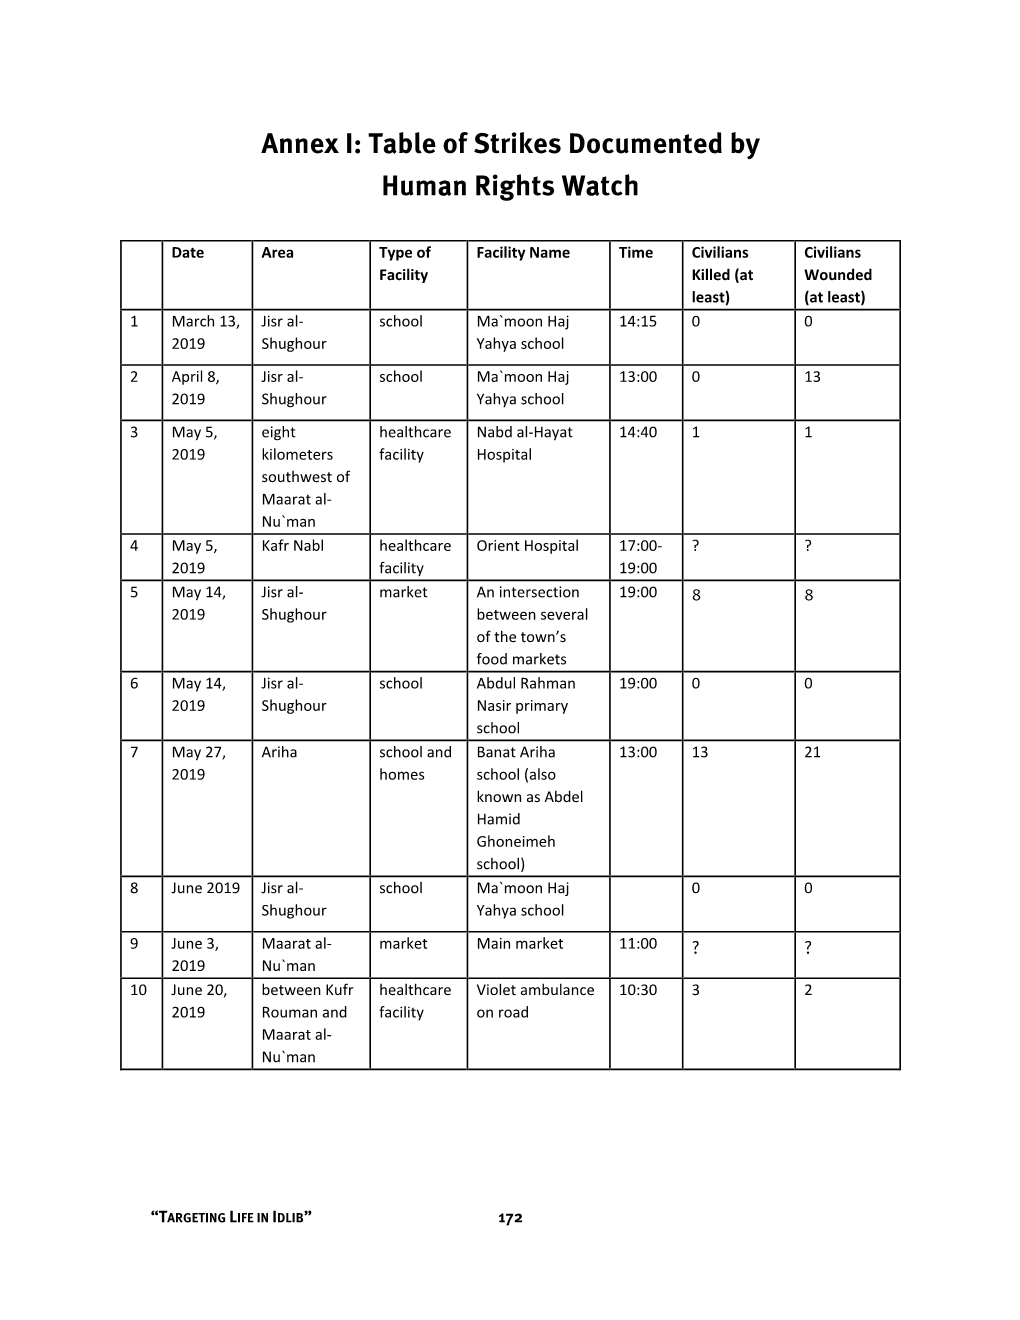 Annex I: Table of Strikes Documented by Human Rights Watch